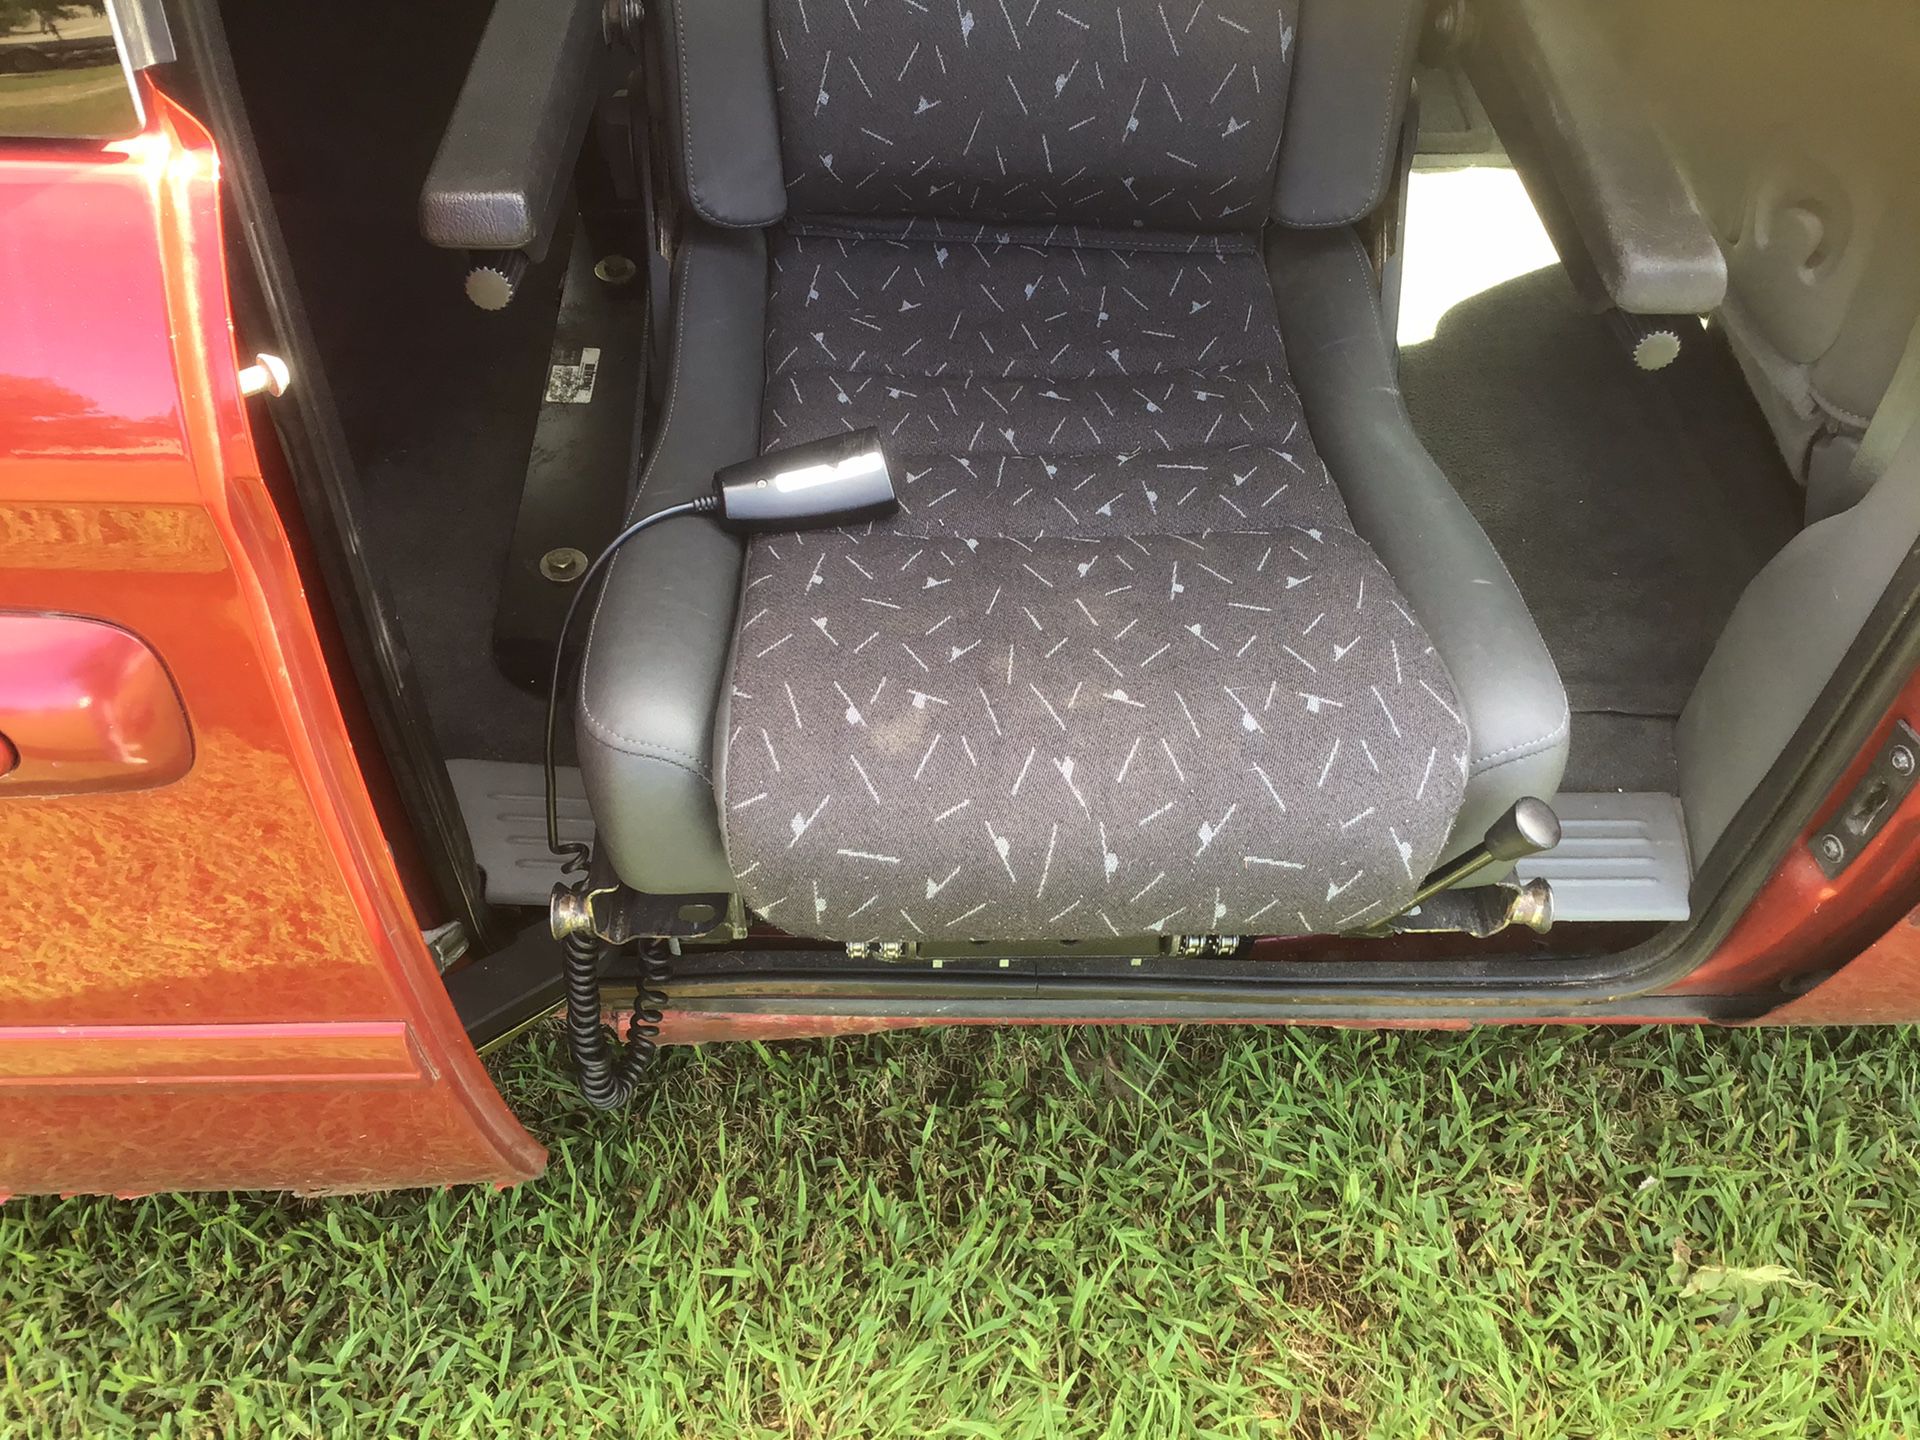 2006 Dodge Grand Caravan, with back seat that lowers and hooks into a wheelchair base to become a wheelchair!